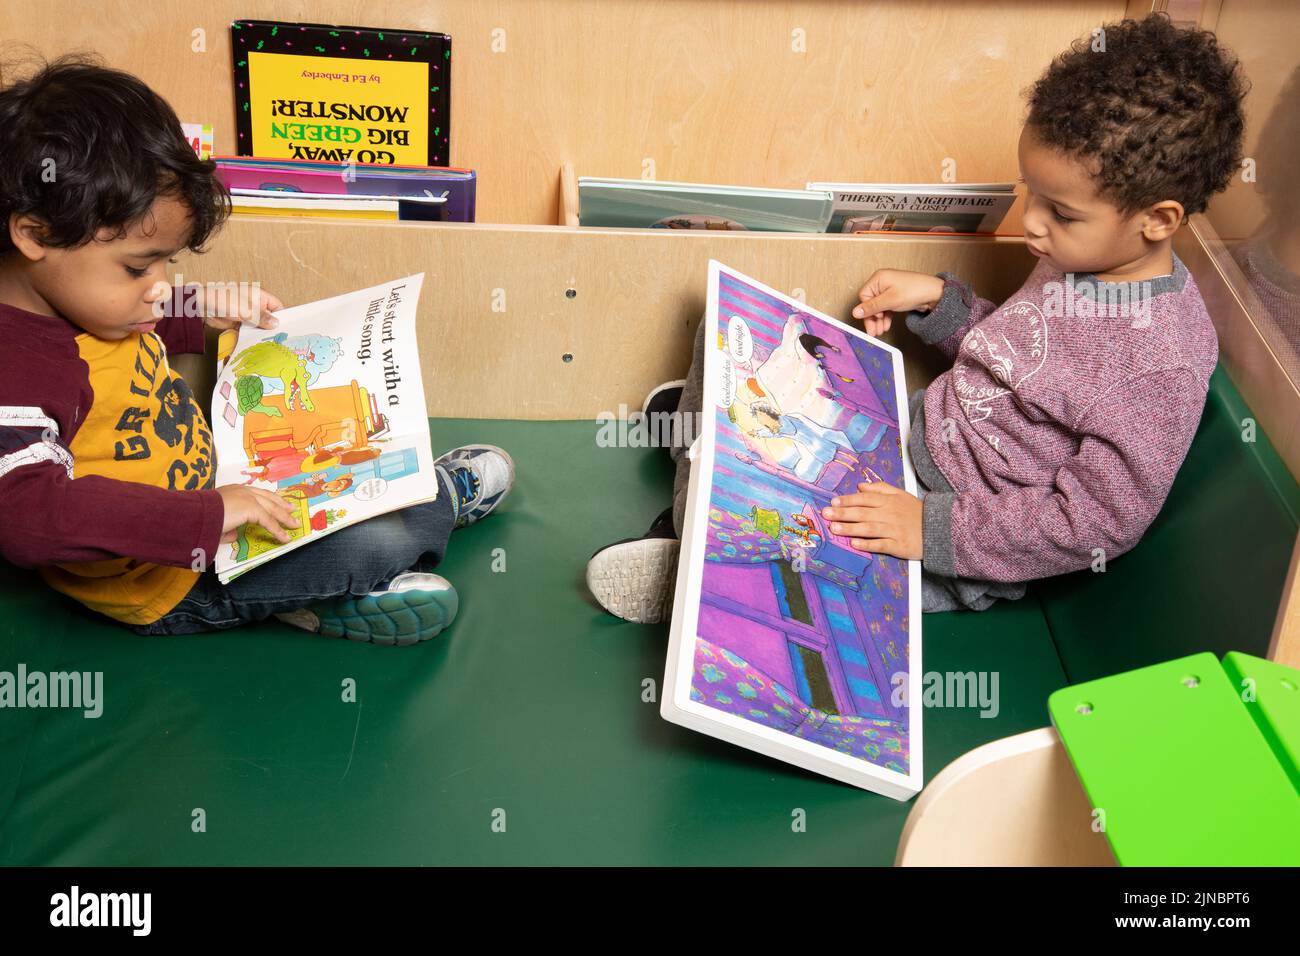 Education Preschool Child Care 4 year olds two boys looking at picture books Stock Photo